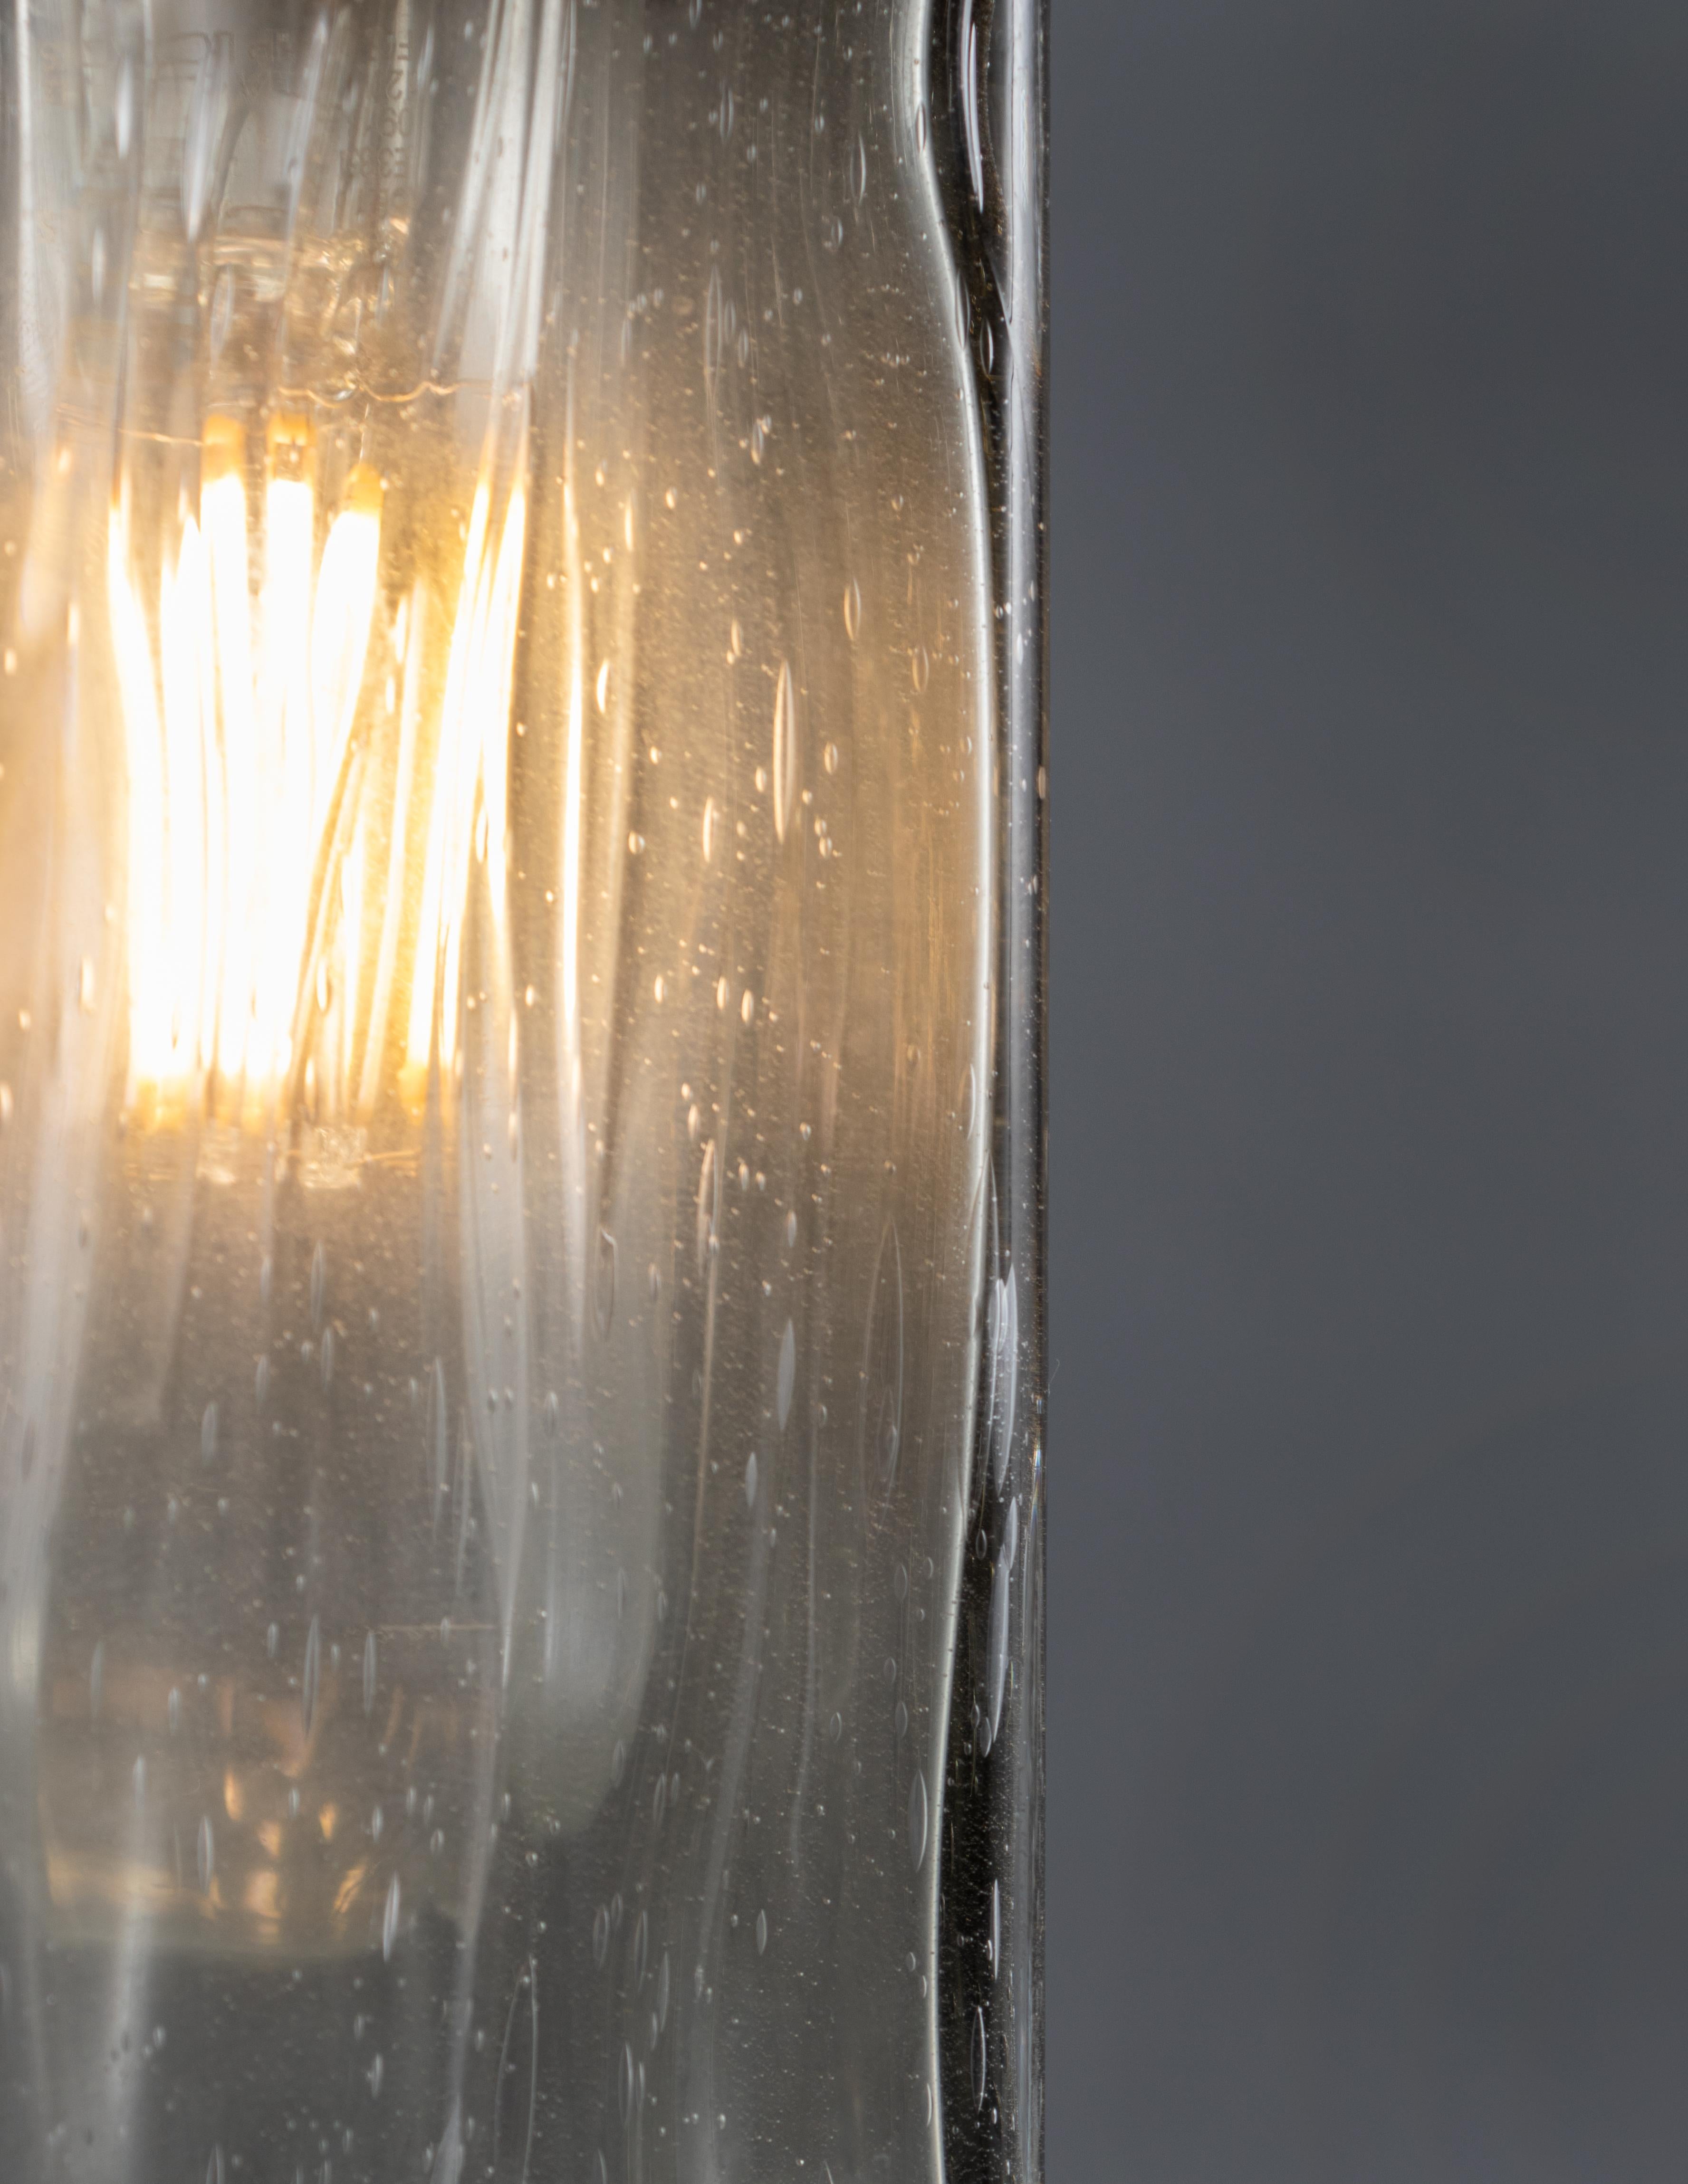 Artisanal cast and striated glass.
 
 Bulb 1 x medium base tubular LED.

Handcrafted by a small team of northern Italian artisans. Sold exclusively at Brendan Bass.

Minimum hanging height: N/A
Maximum hanging height: 70